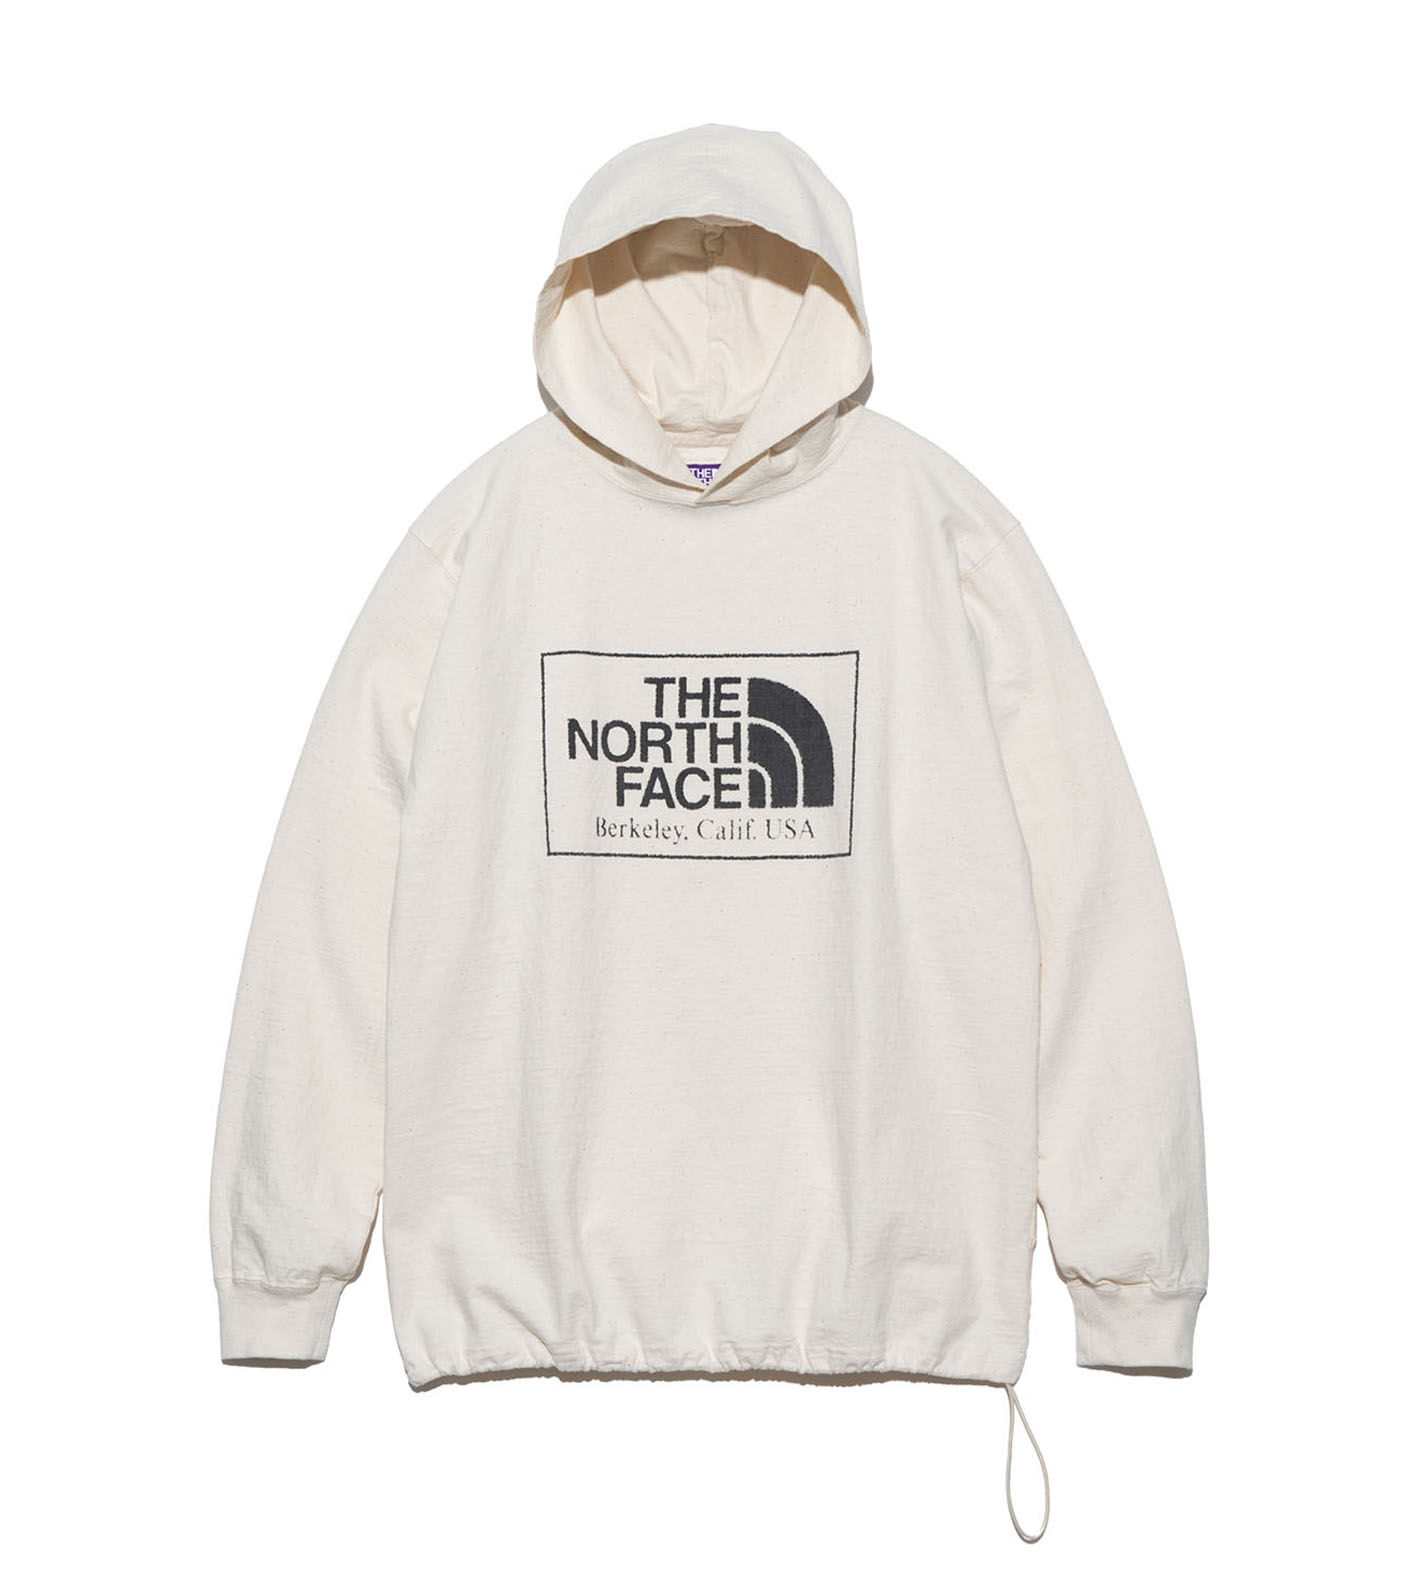 【Sサイズ】THE NORTH FACE GRAPHIC HOODIE